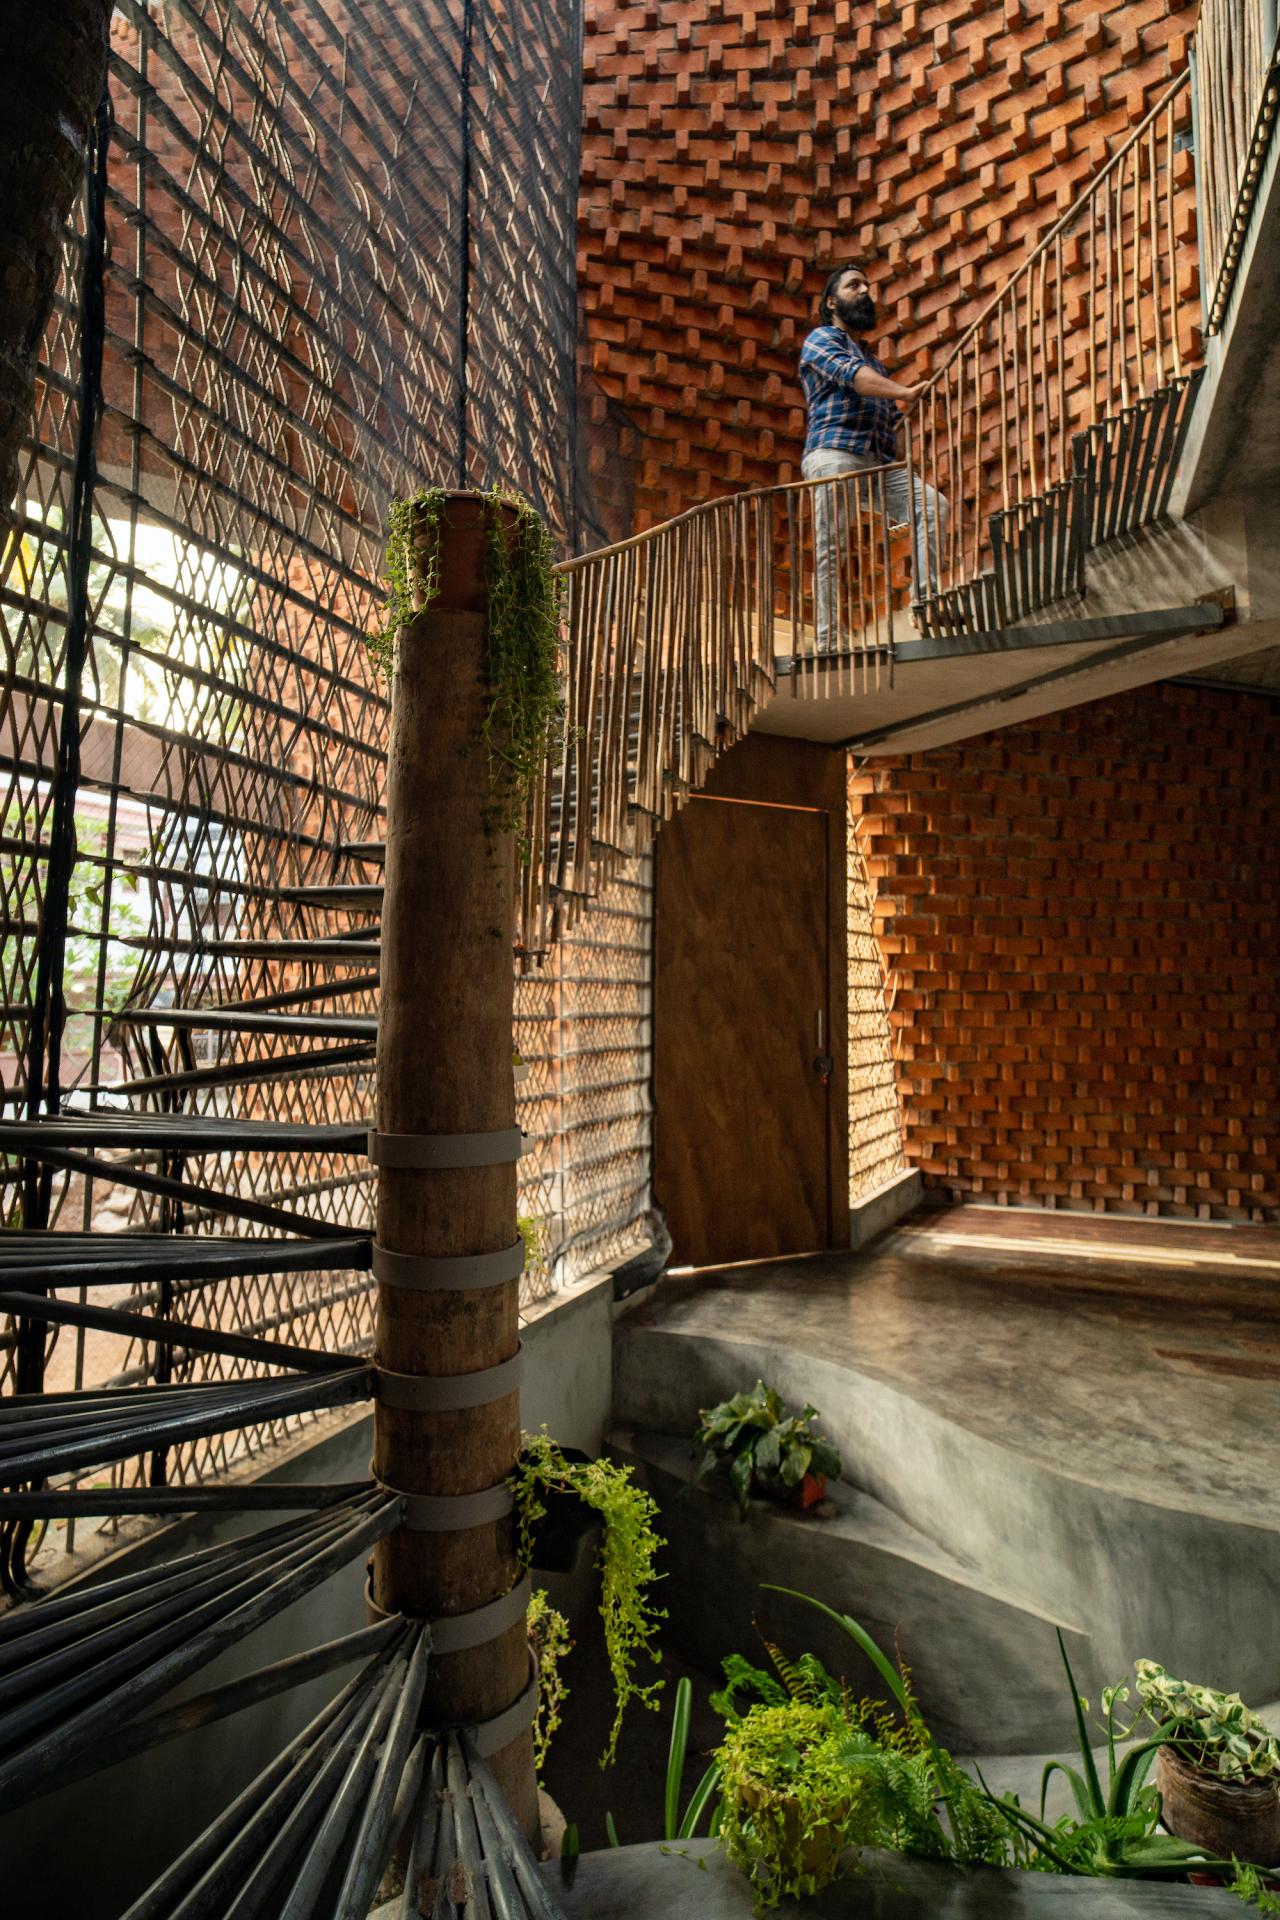 Step Into A Home In India Composed Of Pirouetting Fired Brick Walls